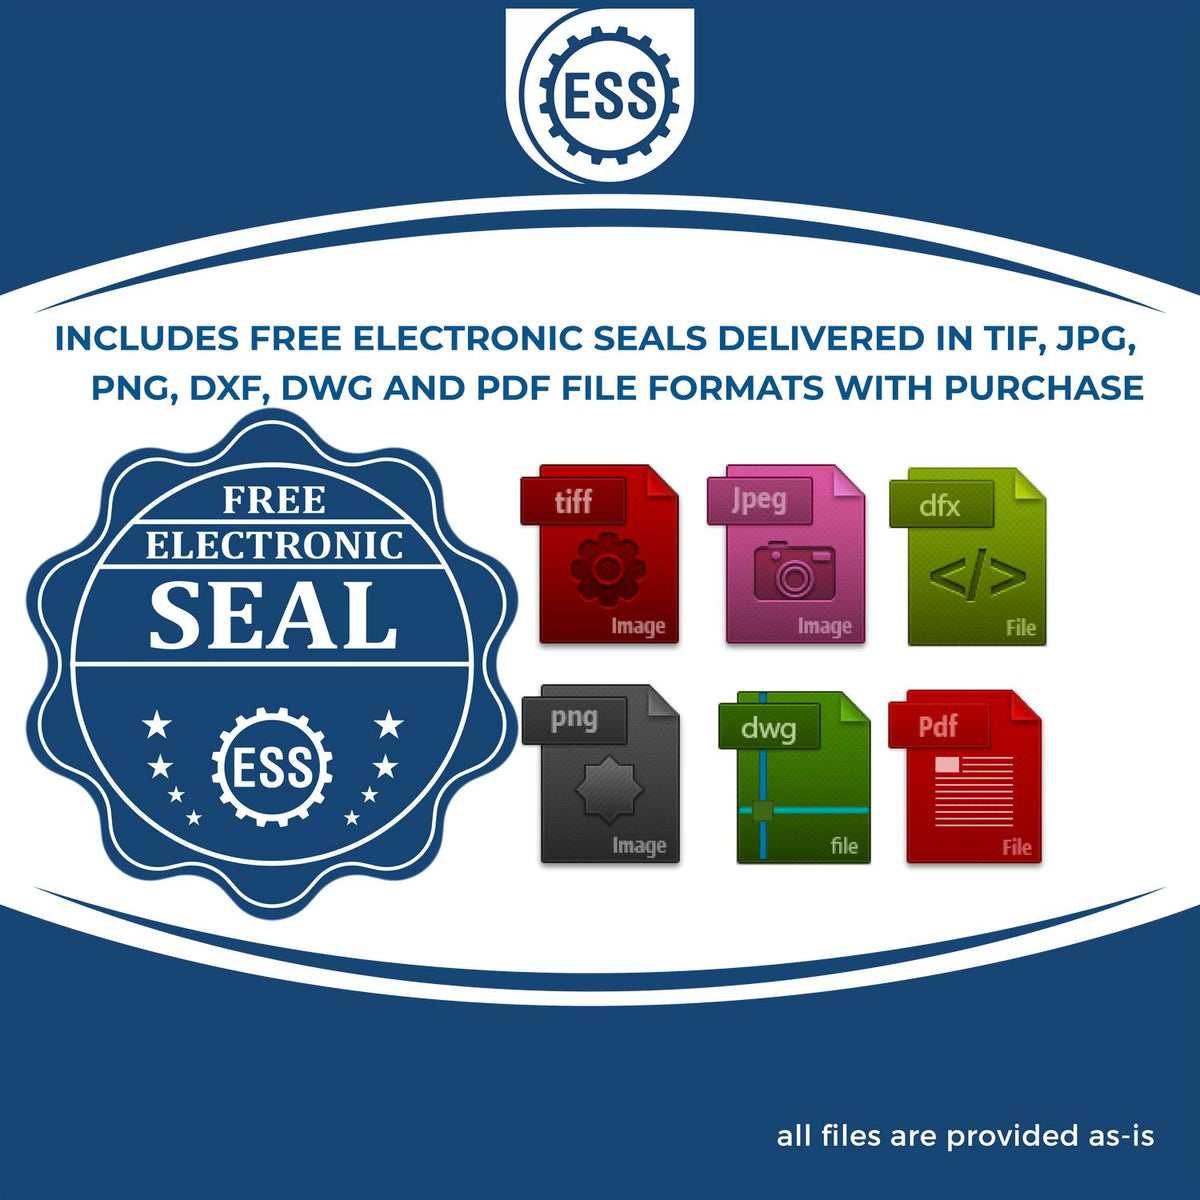 An infographic for the free electronic seal for the Premium MaxLight Pre-Inked Colorado Geology Stamp illustrating the different file type icons such as DXF, DWG, TIF, JPG and PNG.